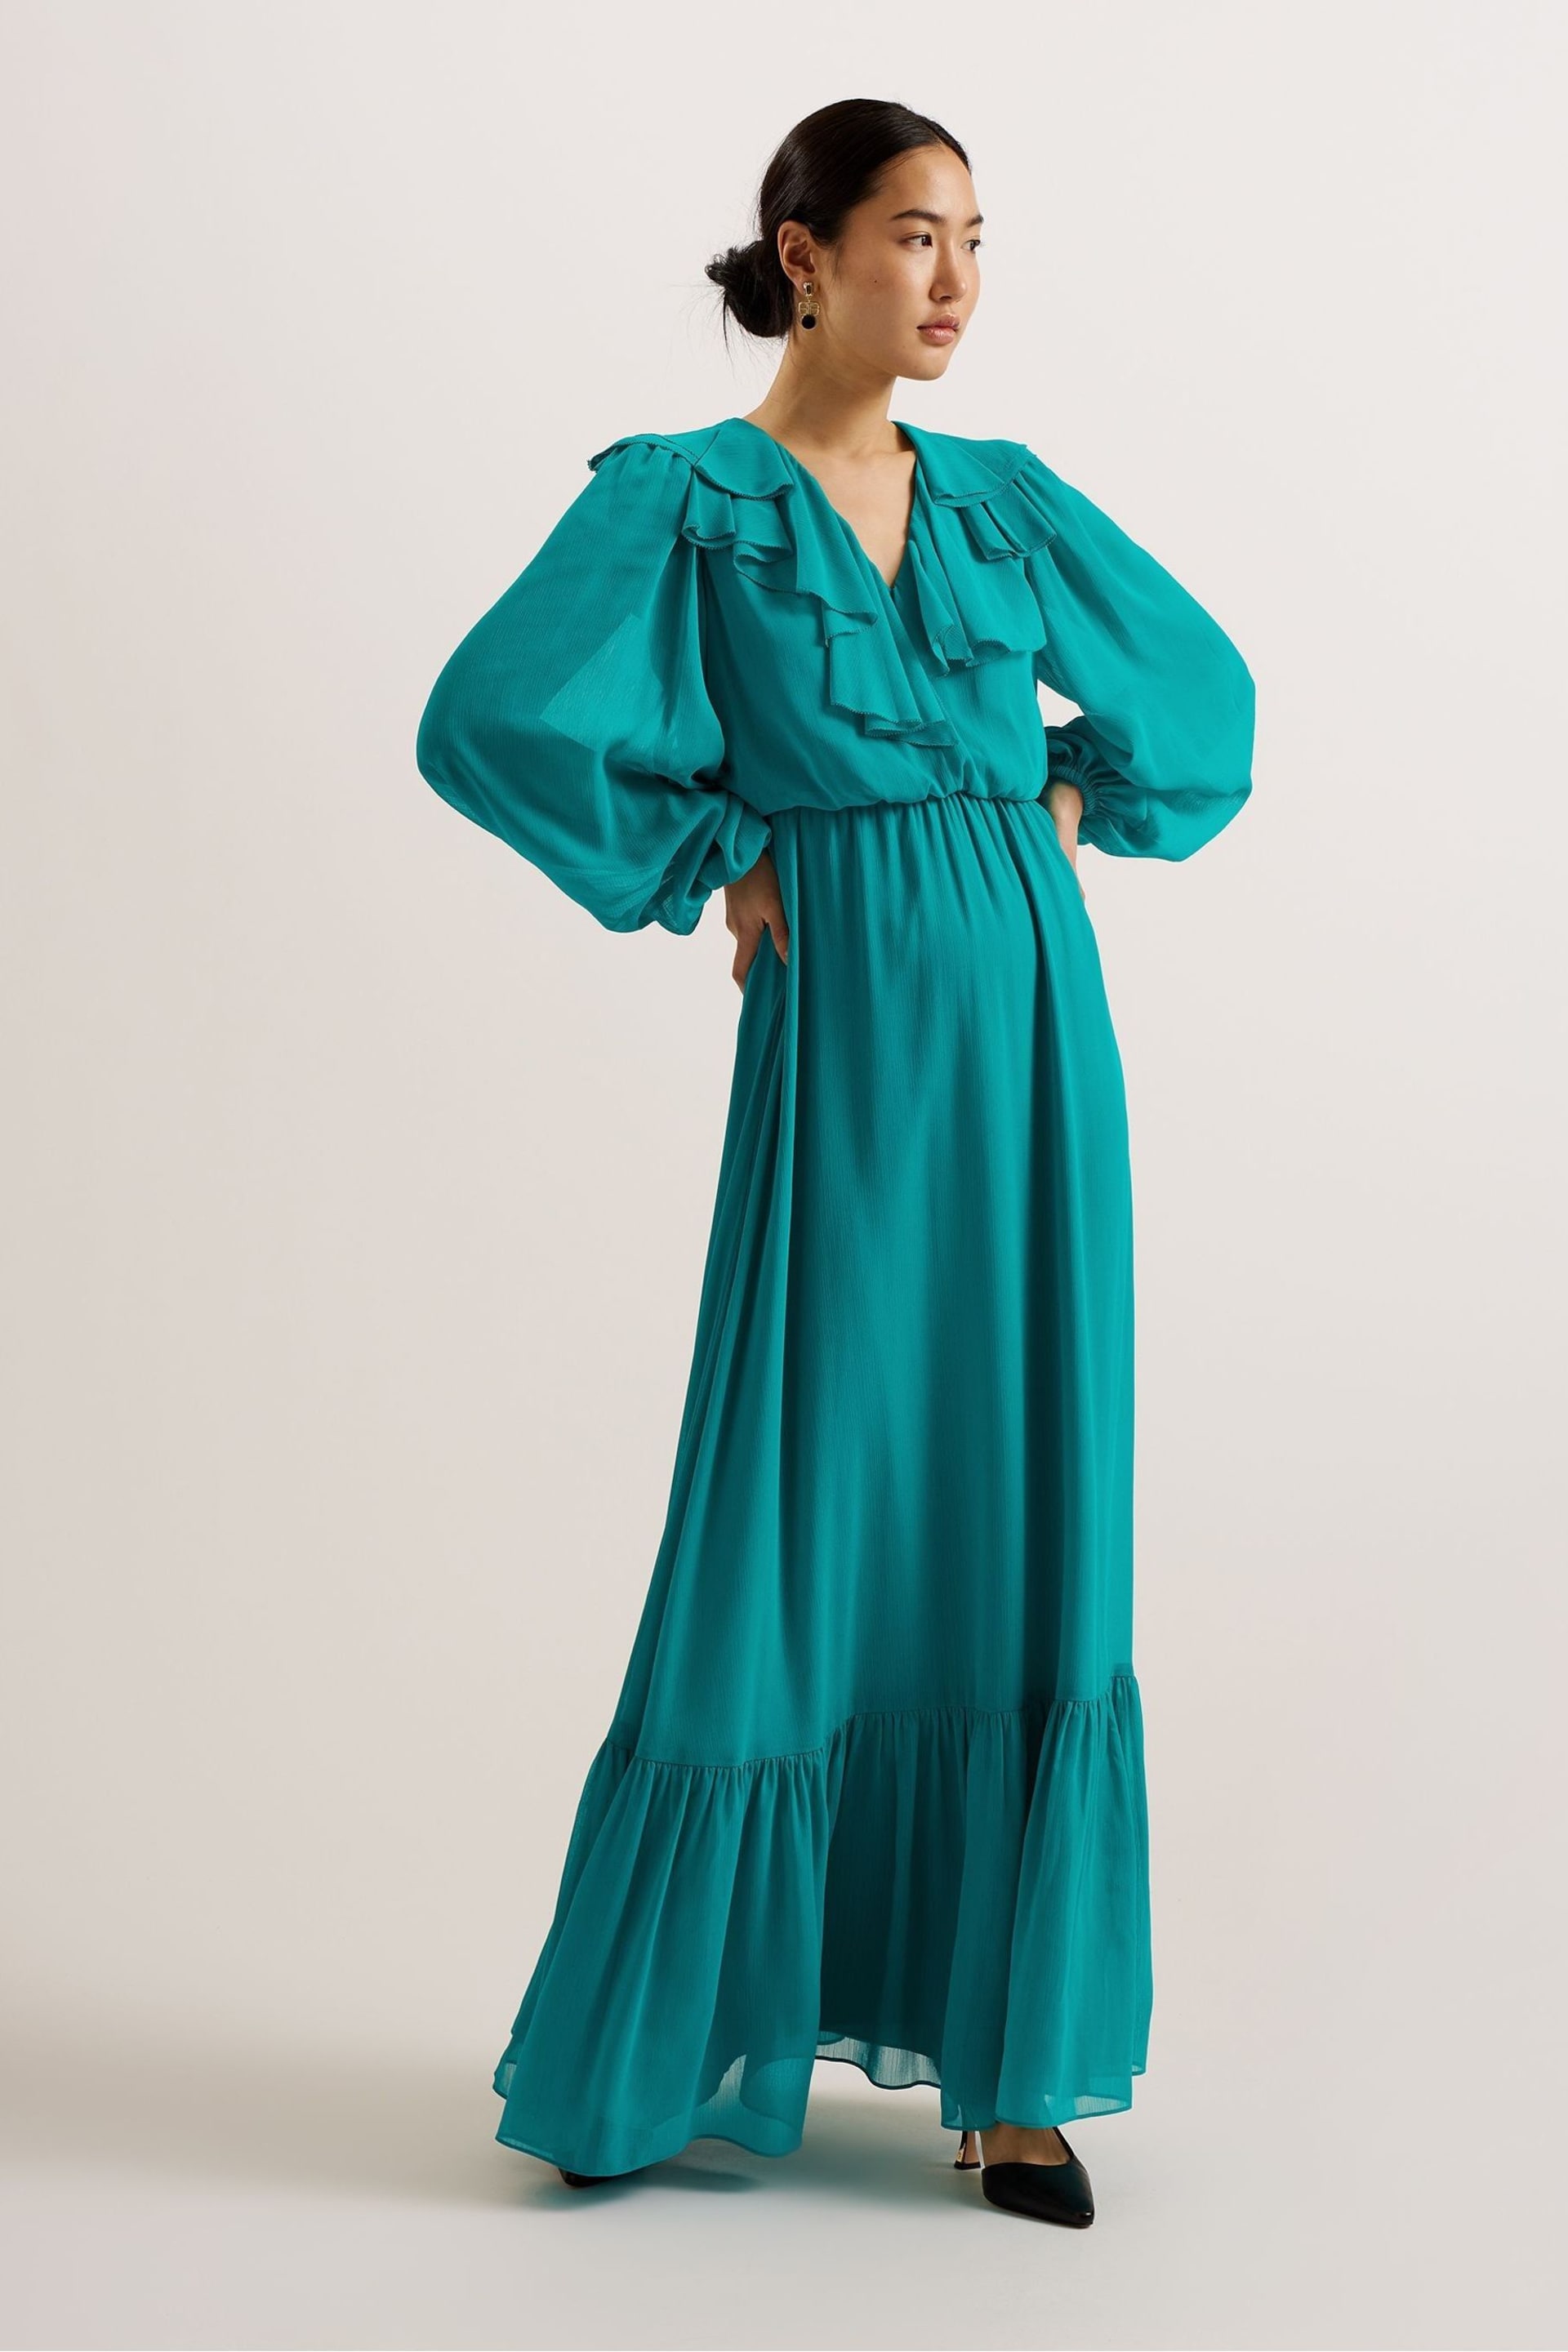 Ted Baker Green Keina Long Sleeve Maxi Dress With Ruffles - Image 1 of 6